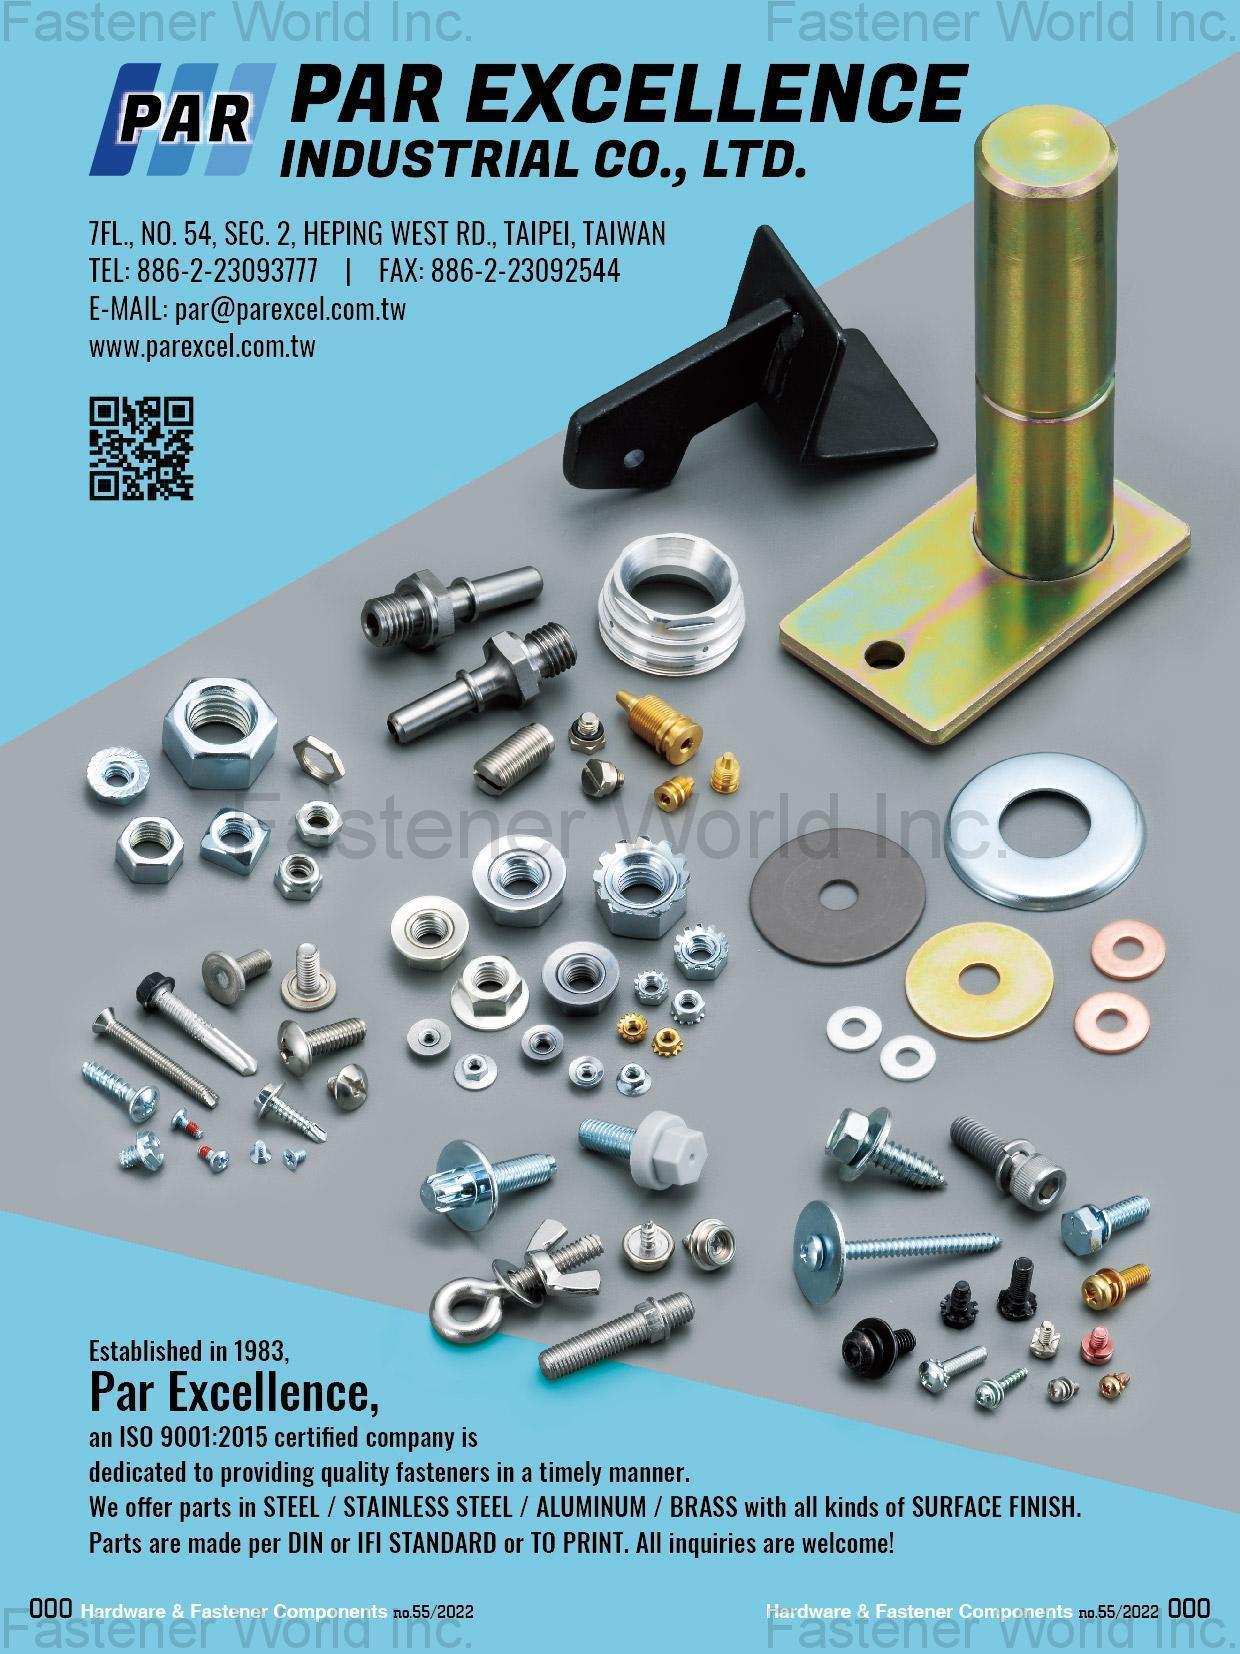 PAR EXCELLENCE INDUSTRIAL CO., LTD.  , Steel/Stainless Steel/Aluminum/Brass with all kinds of Surface Finish. Parts are made per DIN or IFI Standard or to Print.